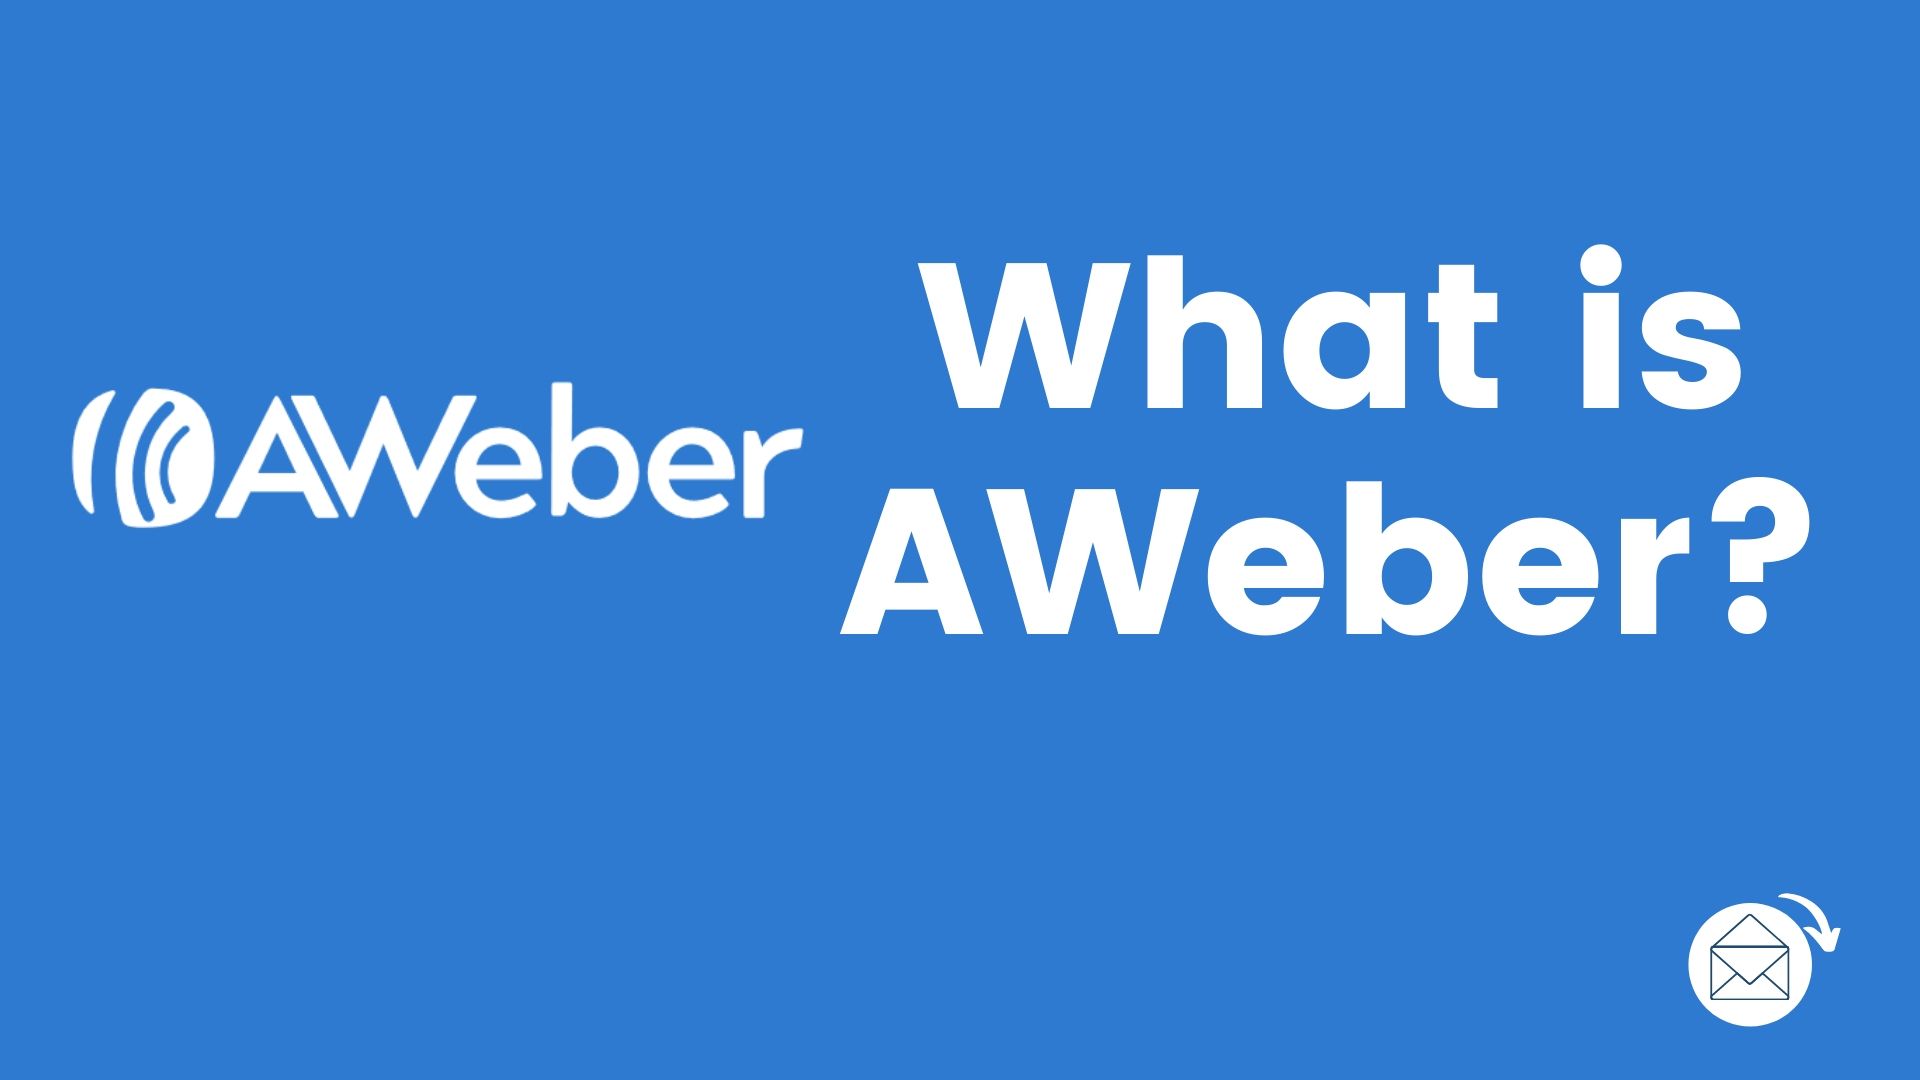 What is Aweber? (definition)